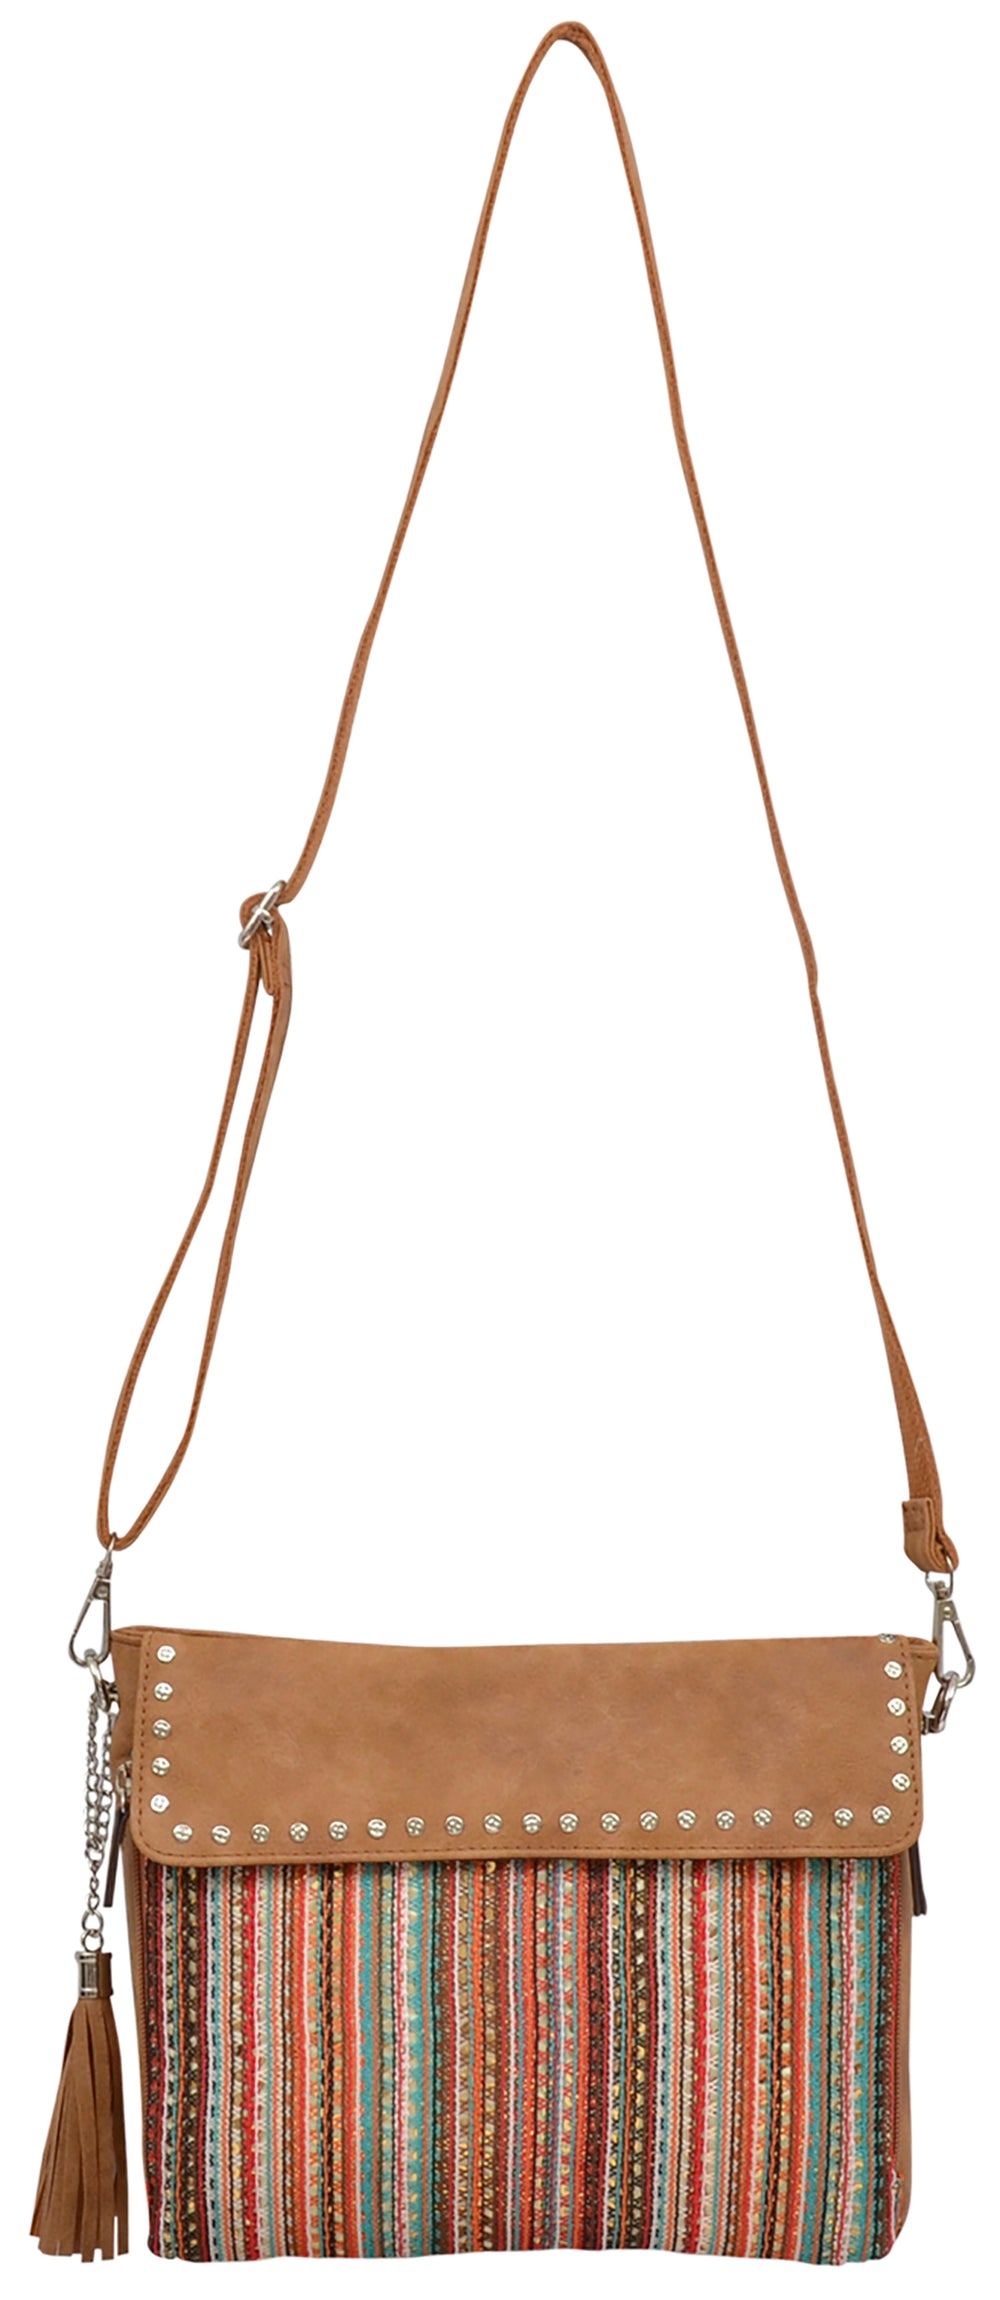 Angel Ranch Conceal & Carry Cross Body Bag - Multi